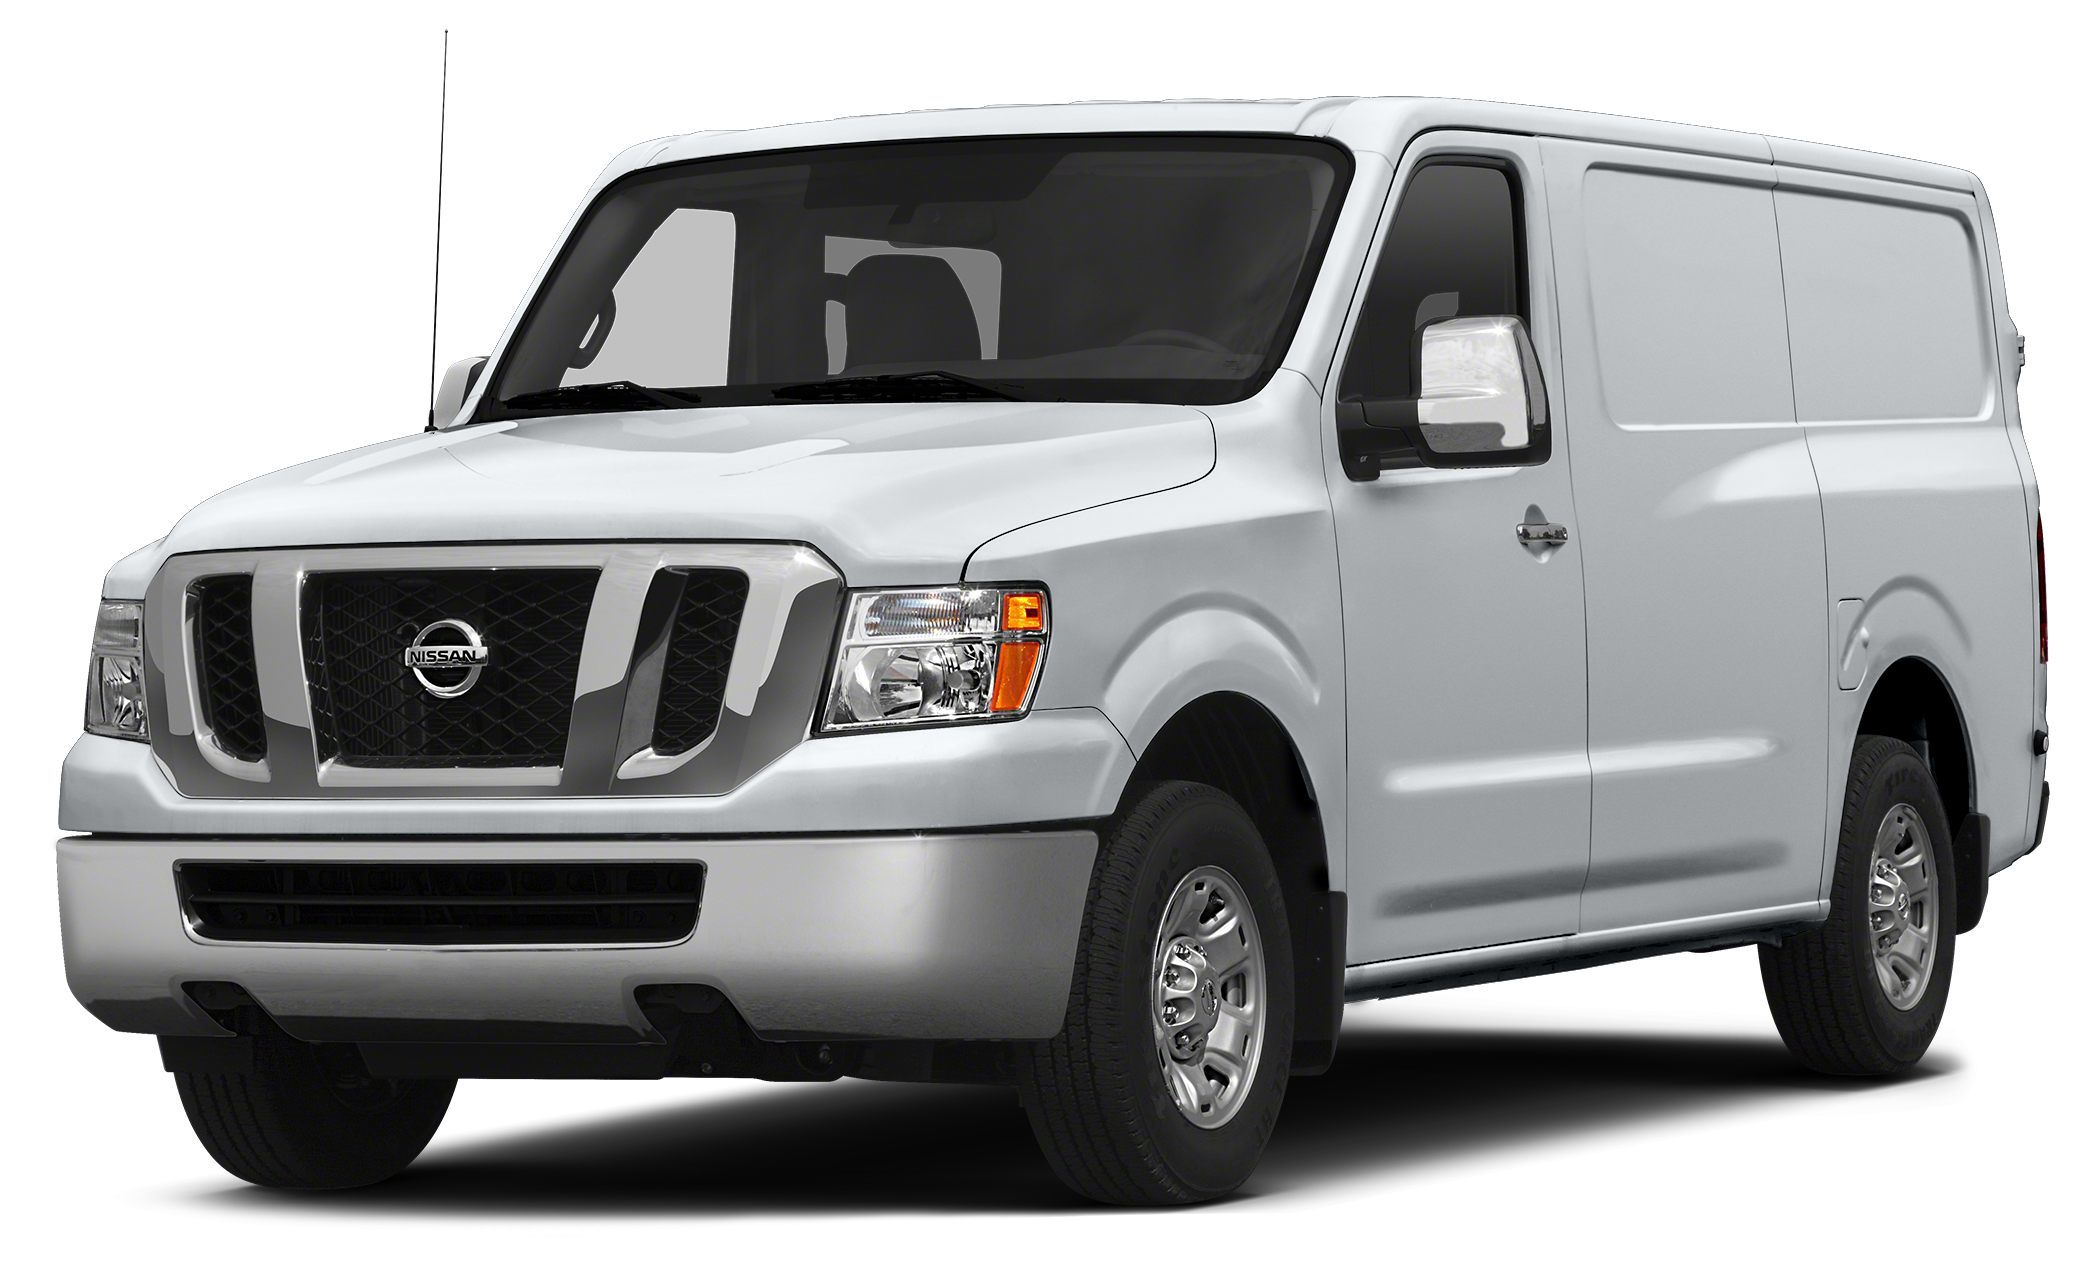 2016 Cargo Van Reviews, Mercedes, Ford, Ram, Nissan  Movers, Delivery Service, Haul, Moving 